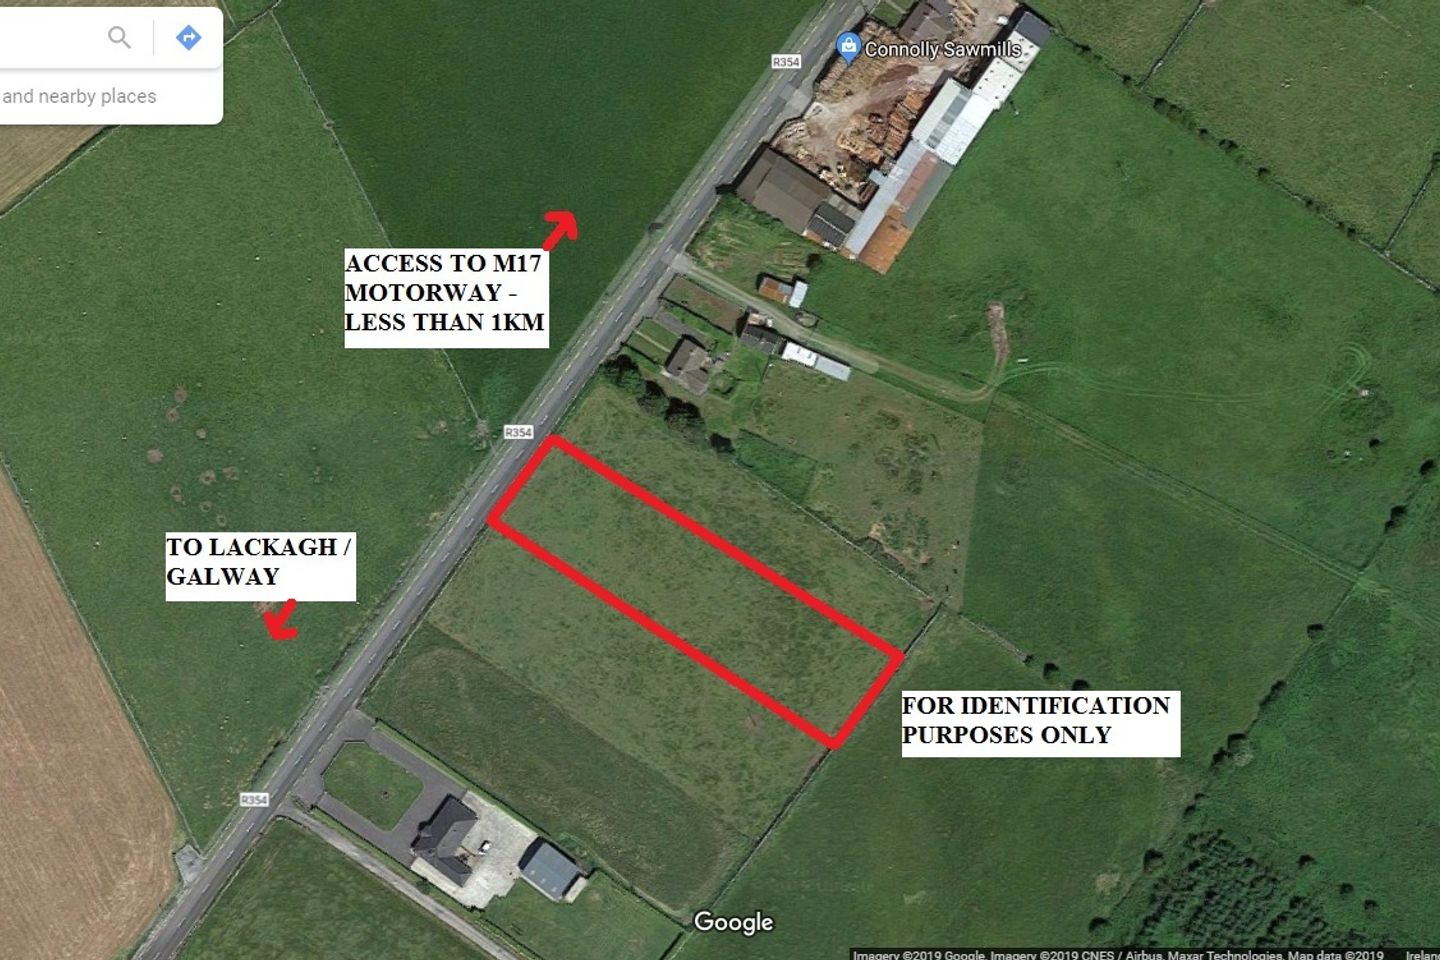 0.92 acre site at Barnaboy, Turloughmore, Co. Galway